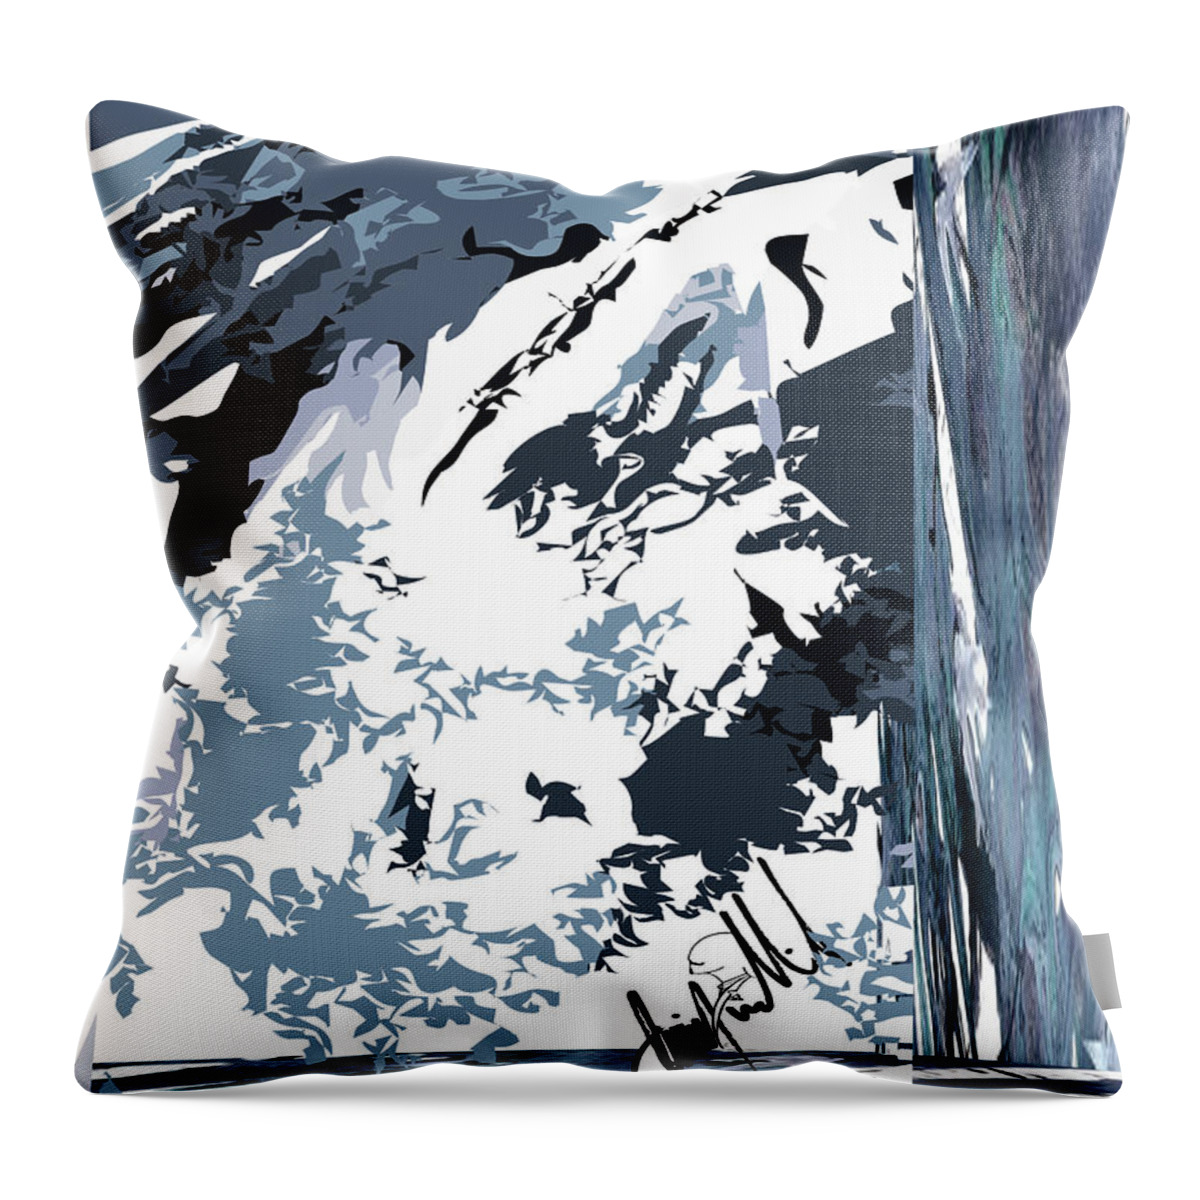  Throw Pillow featuring the digital art Enter by Jimmy Williams